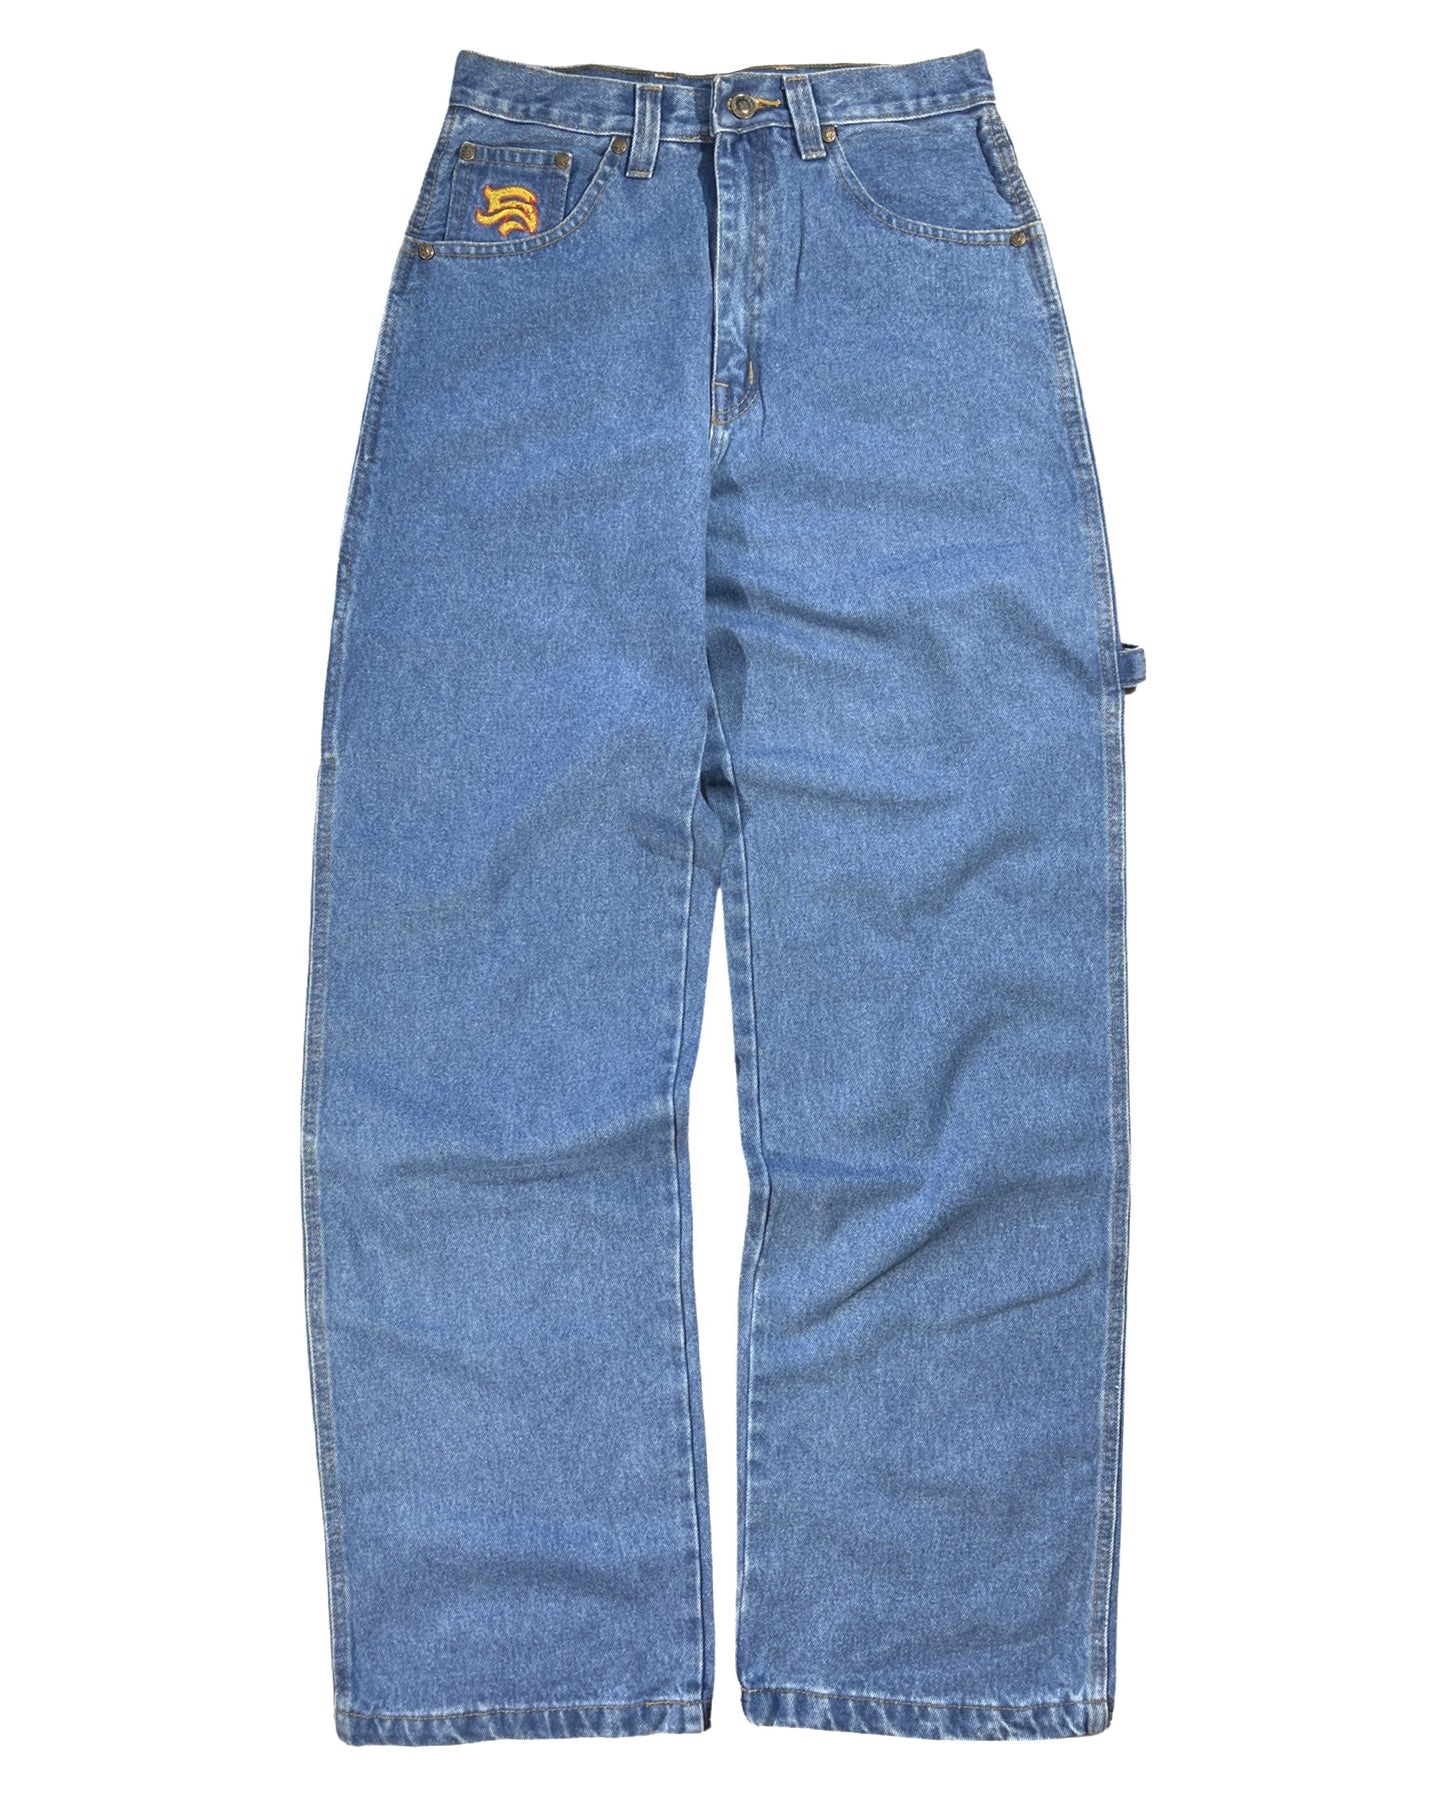 Vintage Static Baggy Jeans - W 30"